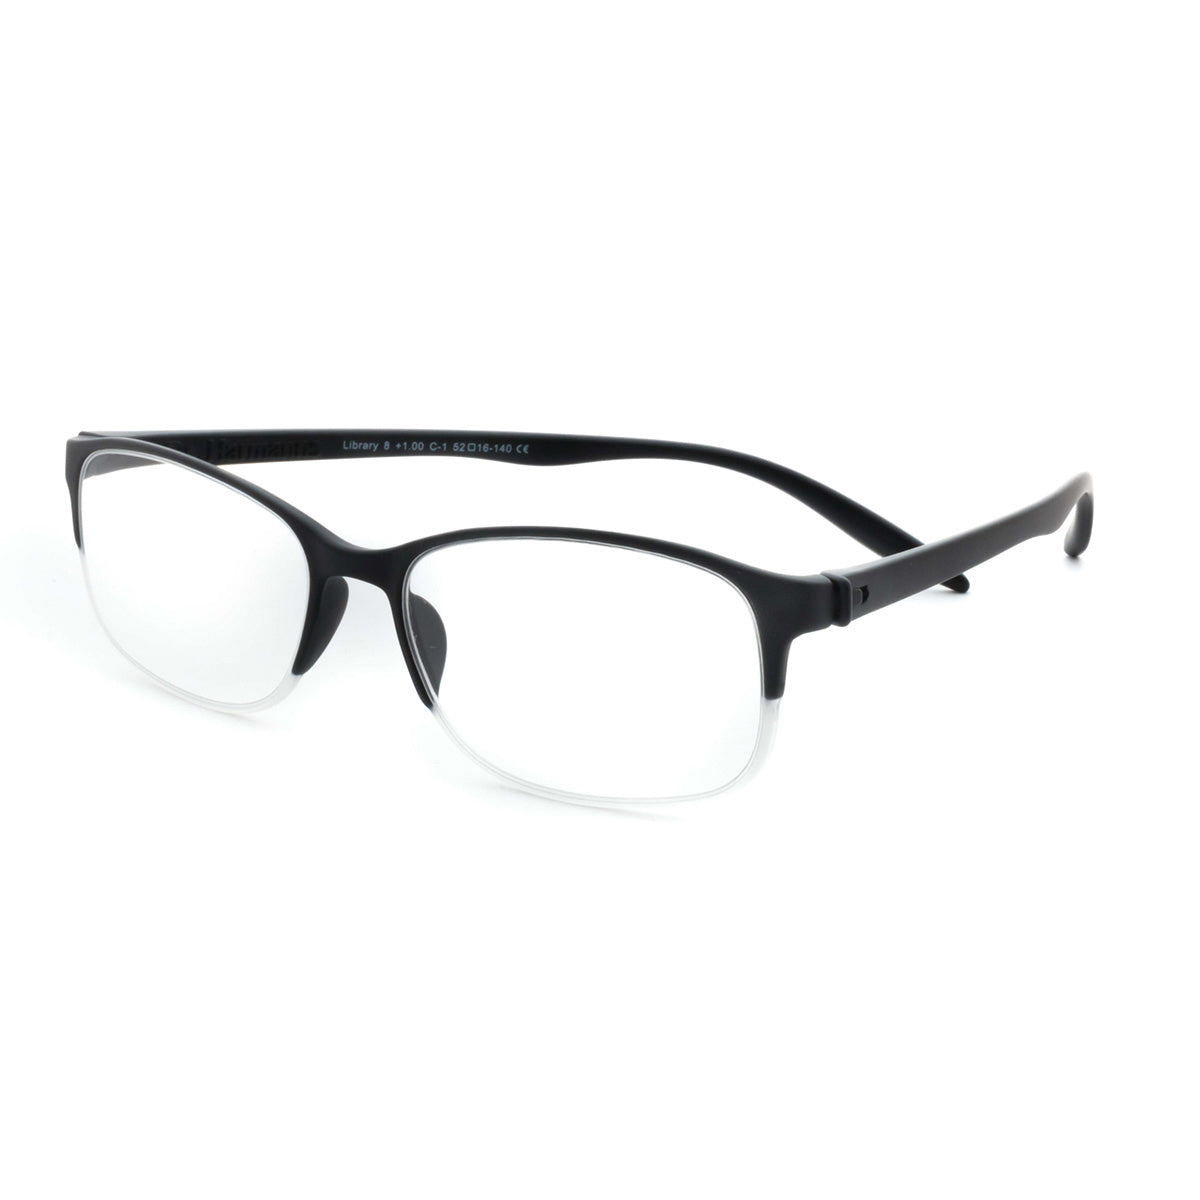 Dr. Harmann's Reading Glasses Library8 by First Lens in classic black